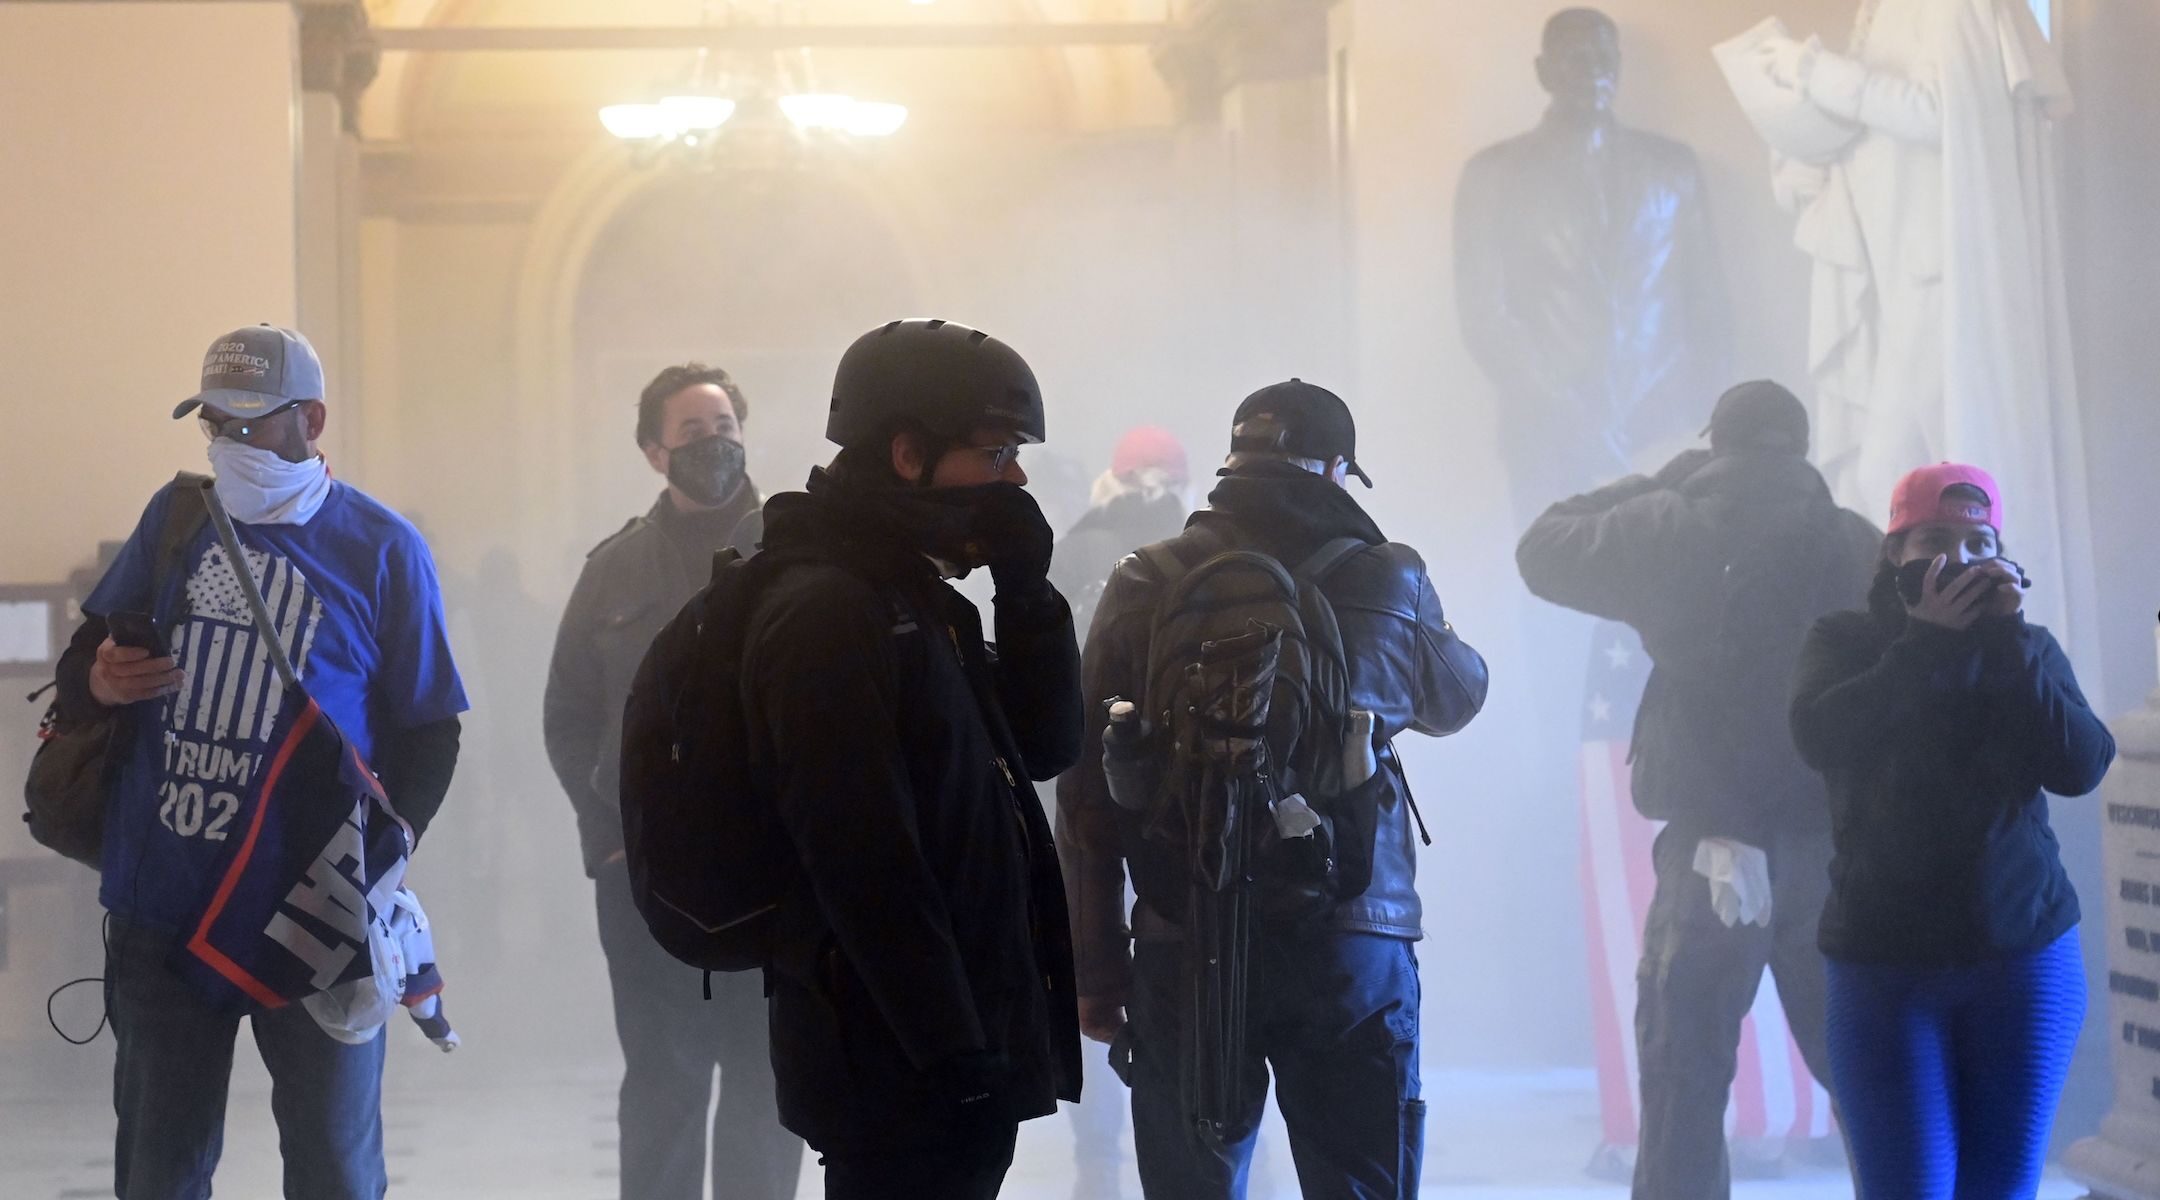 A pro-Trump mob enters the US Capitol as tear gas fills the corridor on January 6, 2021. (Saul Loeb/AFP via Getty Images)